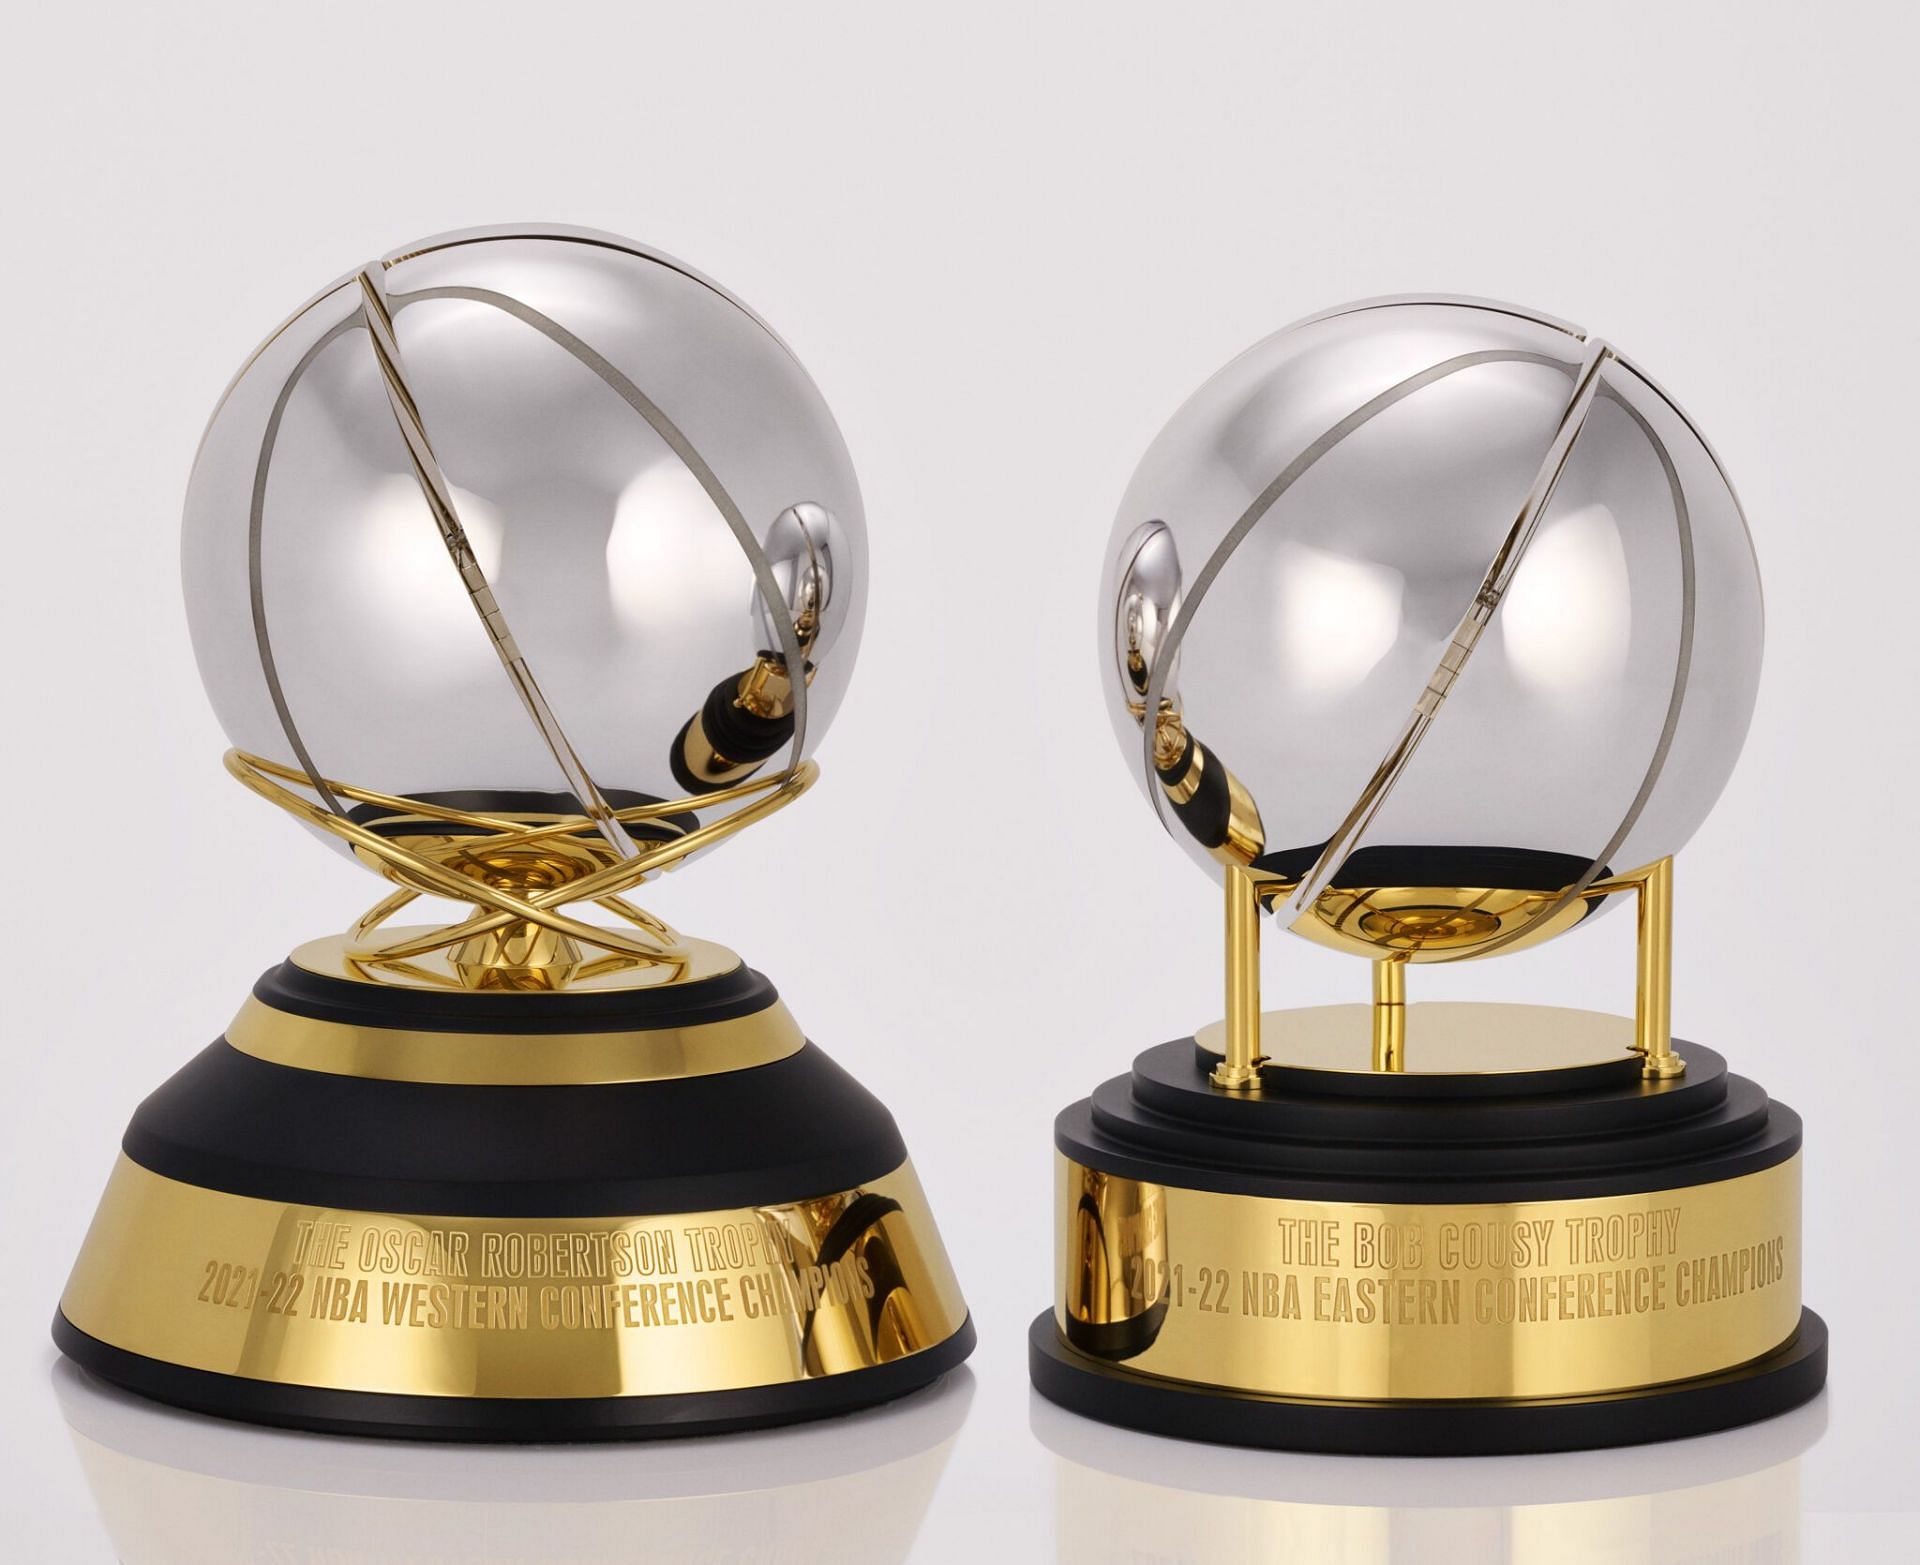 The new Conference Championship trophies. (Photo: NBA.com)